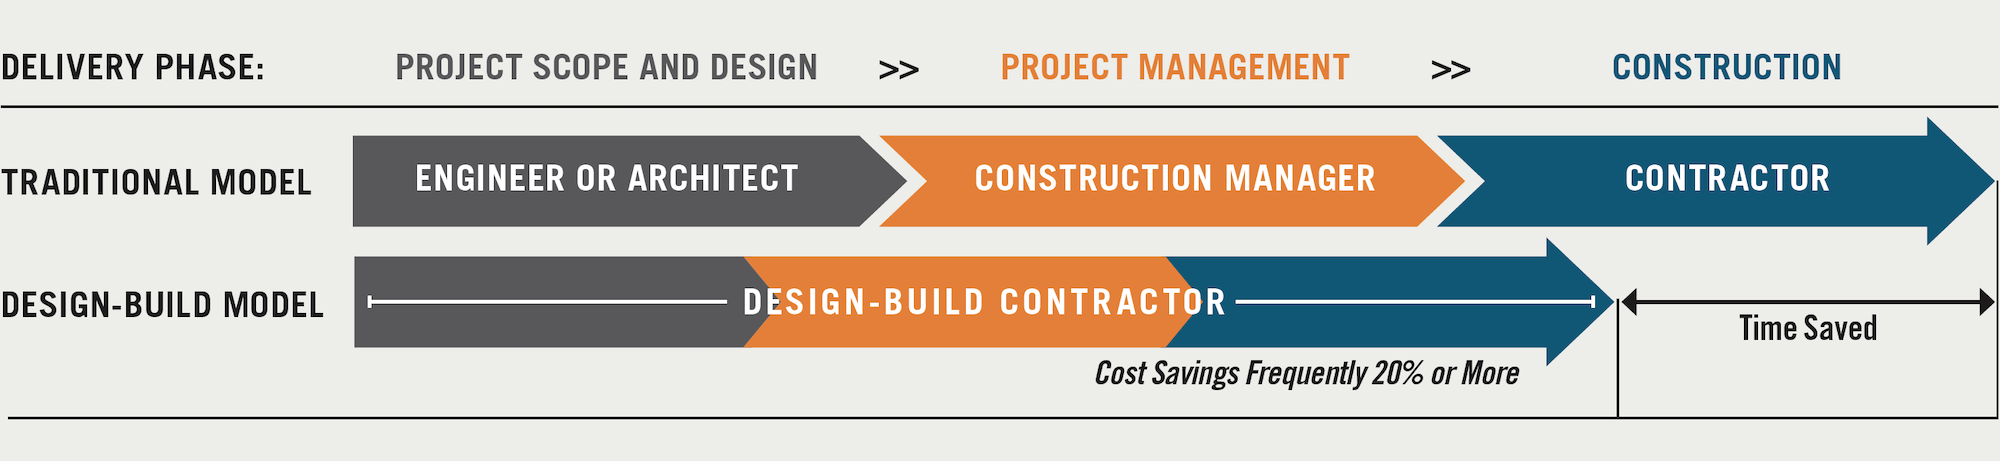 Compared with traditional construction delivery models, design-build projects are frequently completed faster and at lower cost—frequently 20%+ lower.